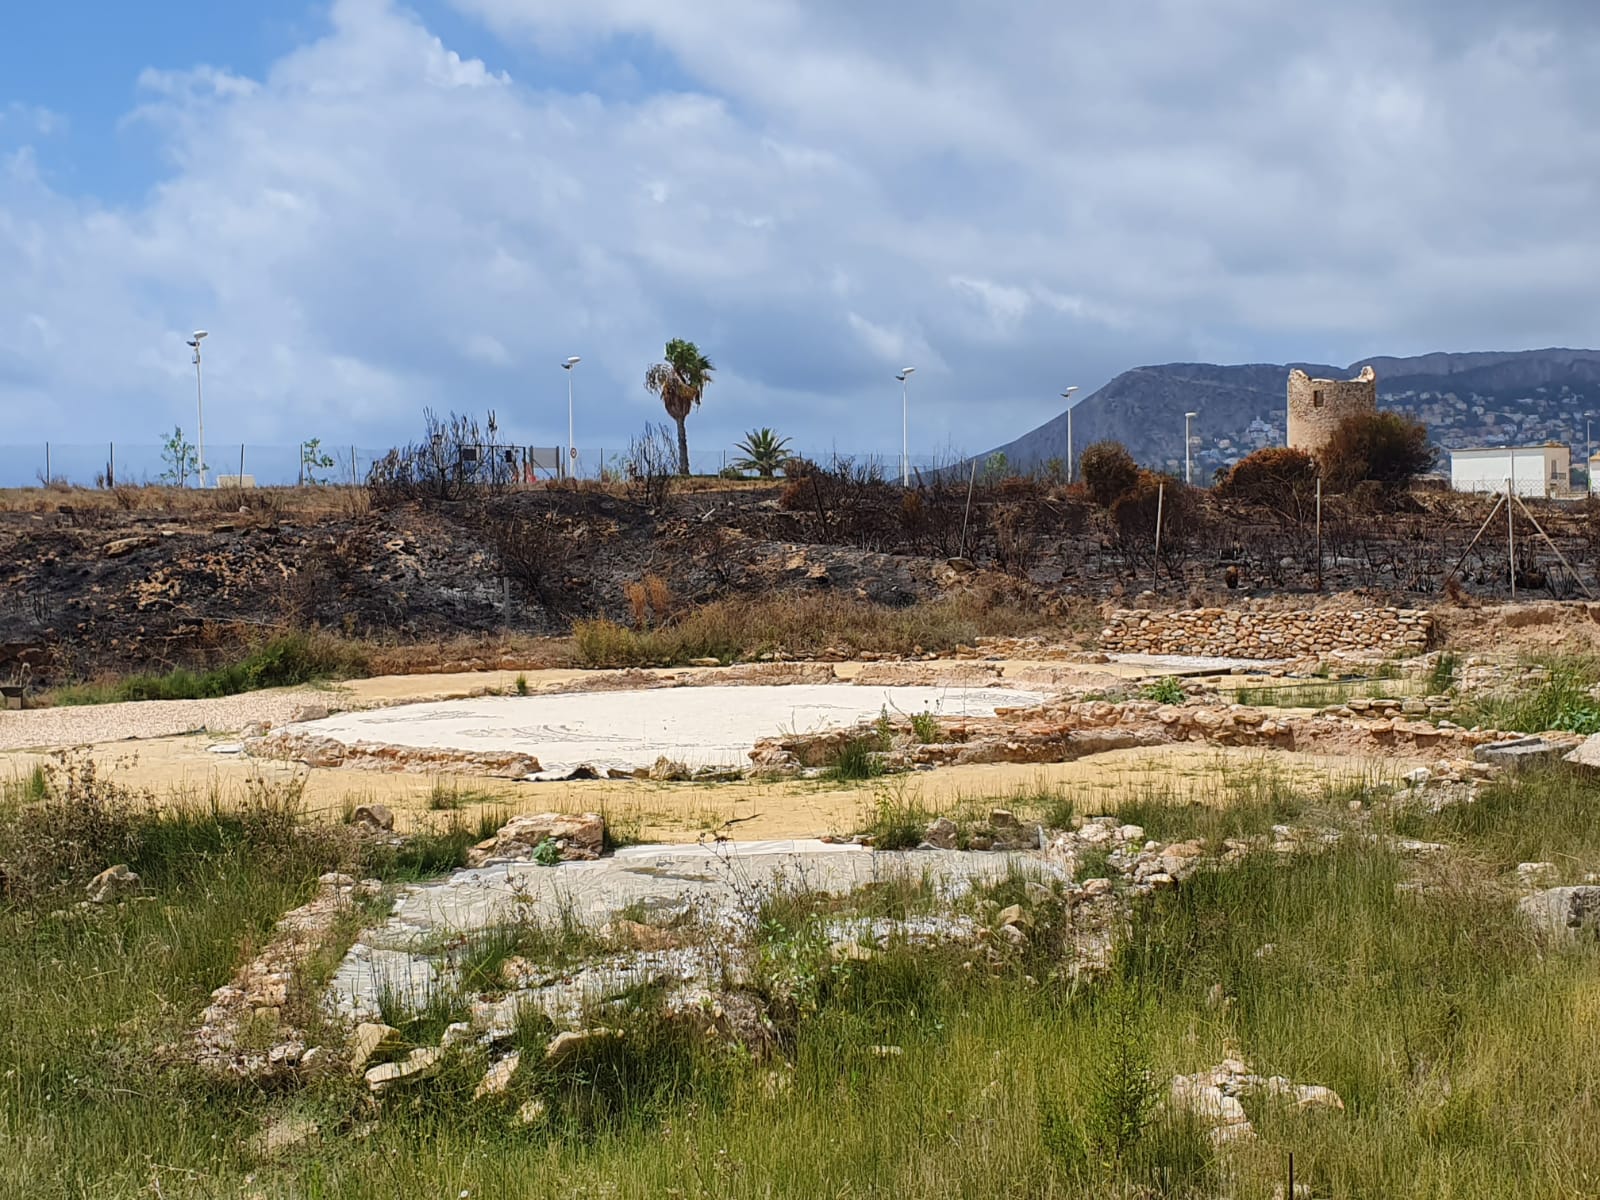 Lucky escape for historic Roman site on Spain's Costa Blanca after stray firework causes blaze